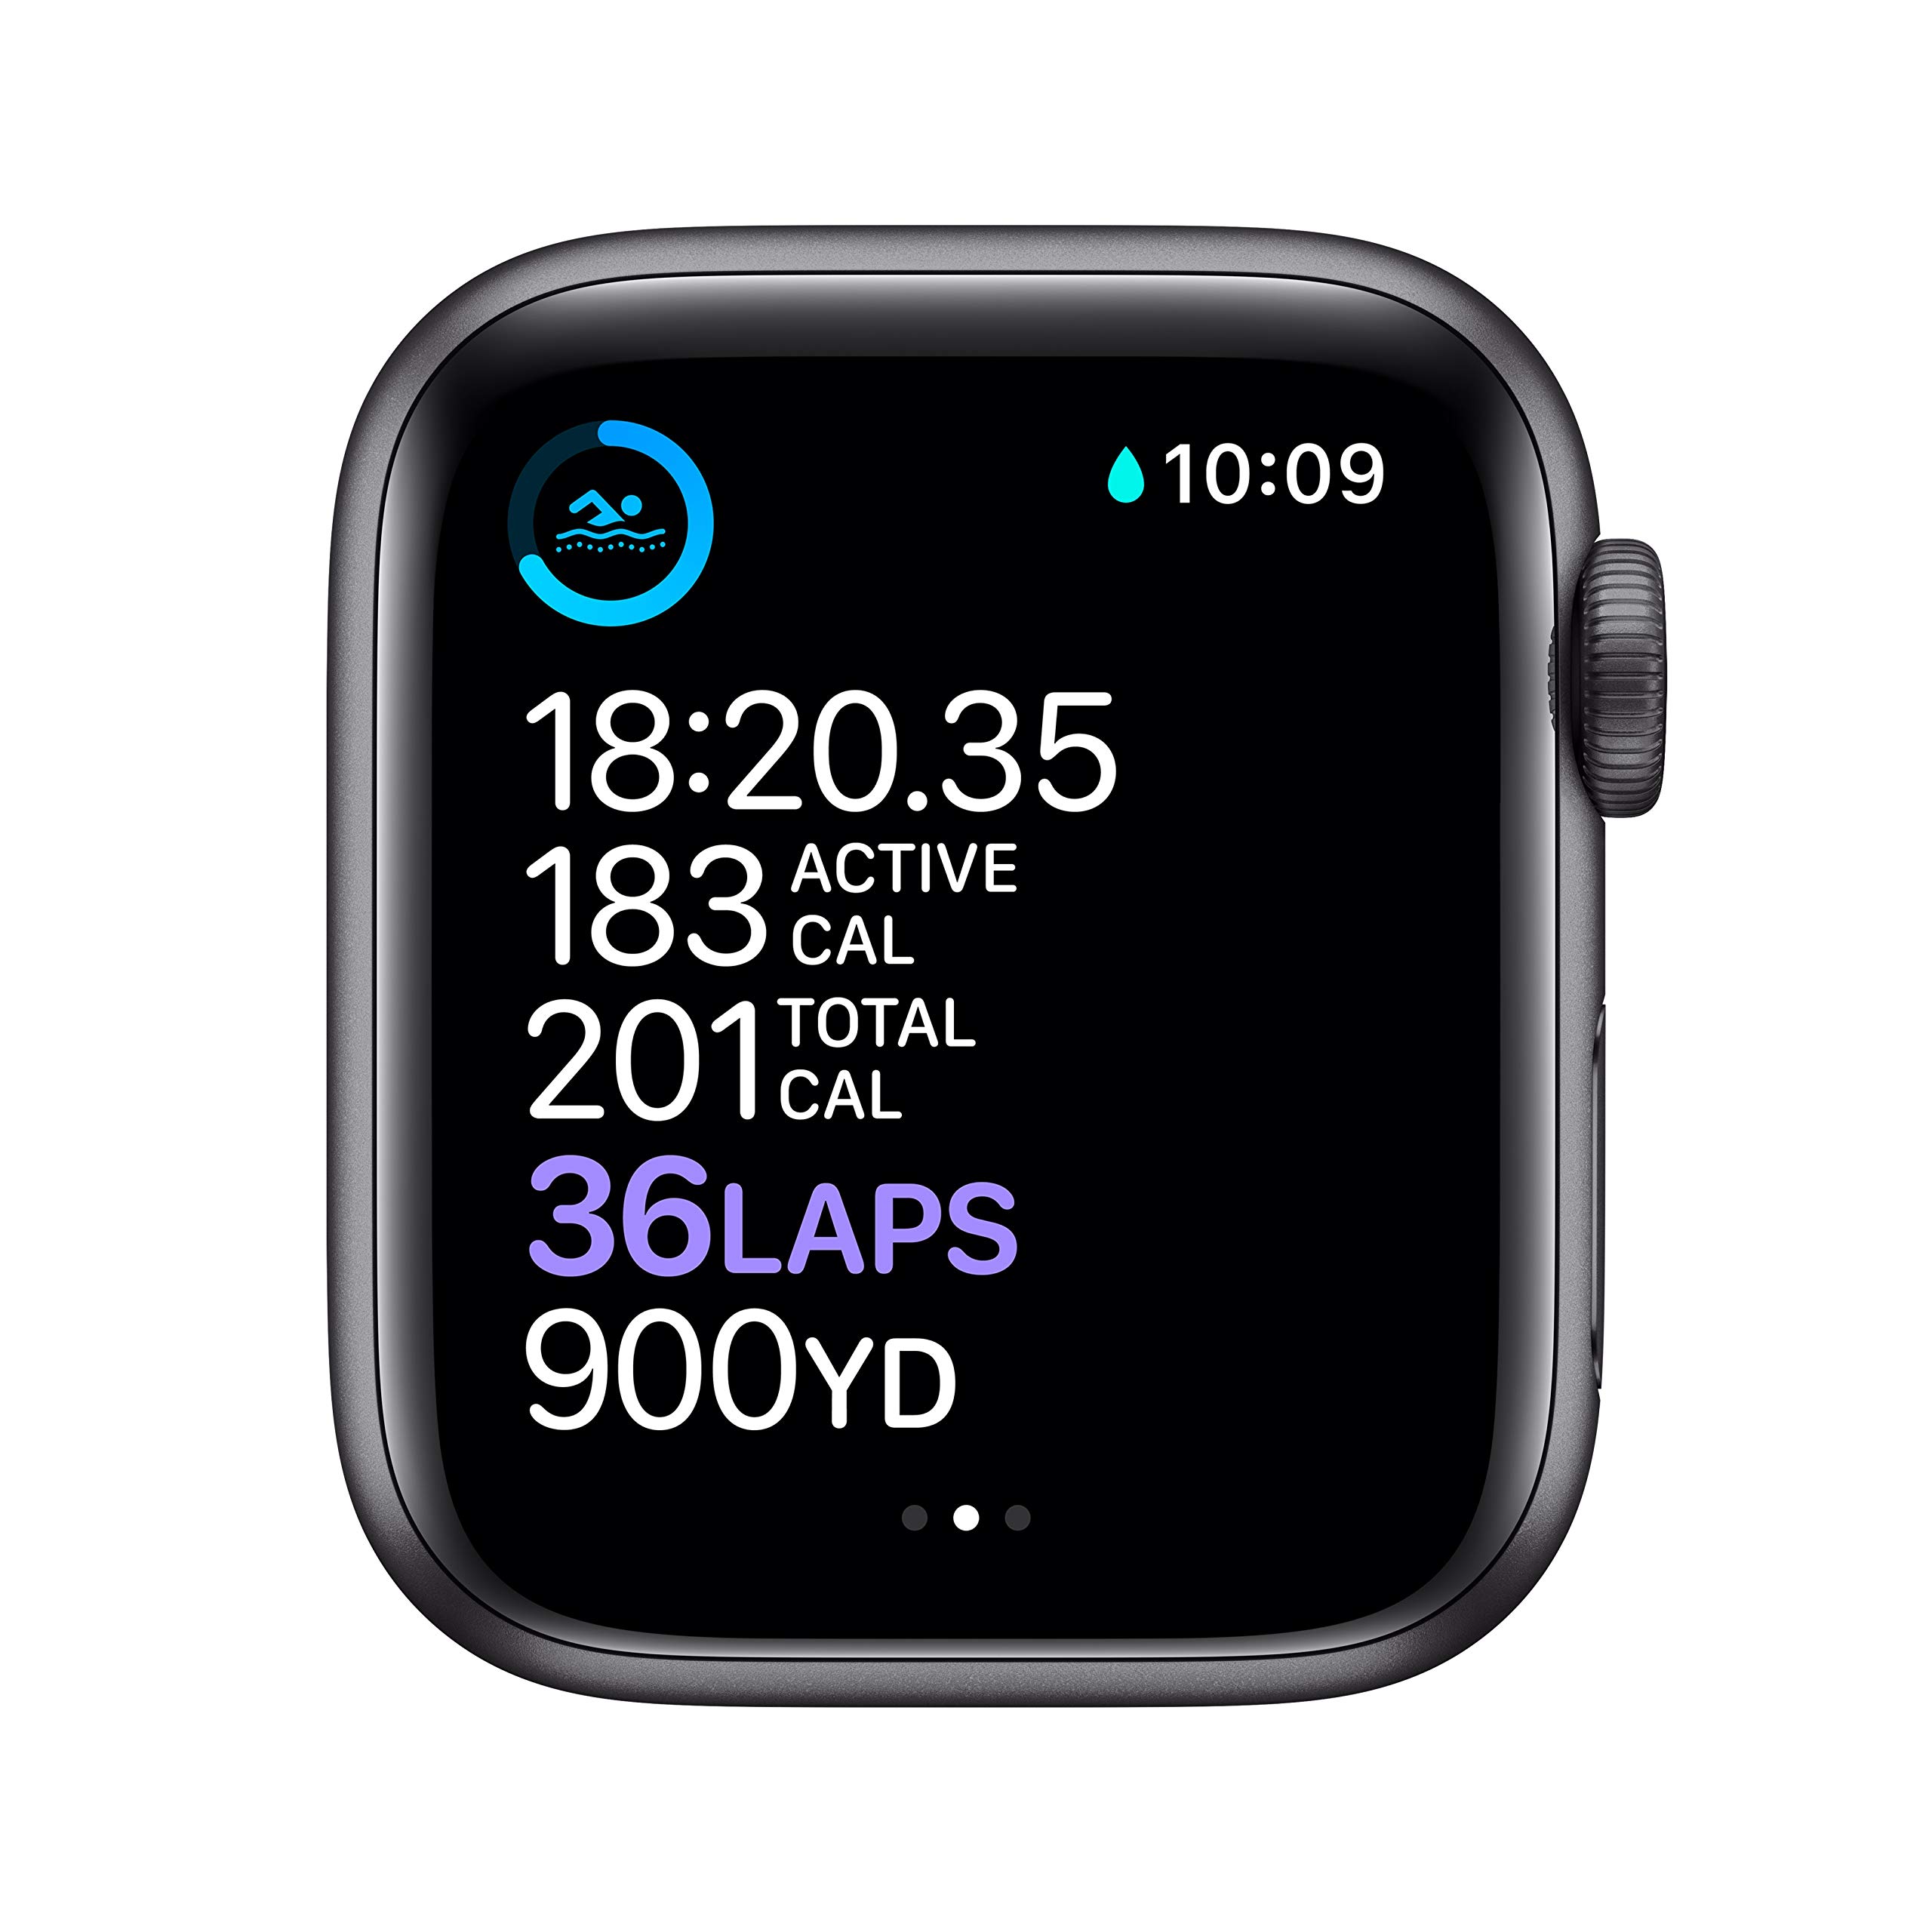 Apple Watch Series 6 (GPS, 40mm) - Space Gray Aluminum Case with Black Sport Band